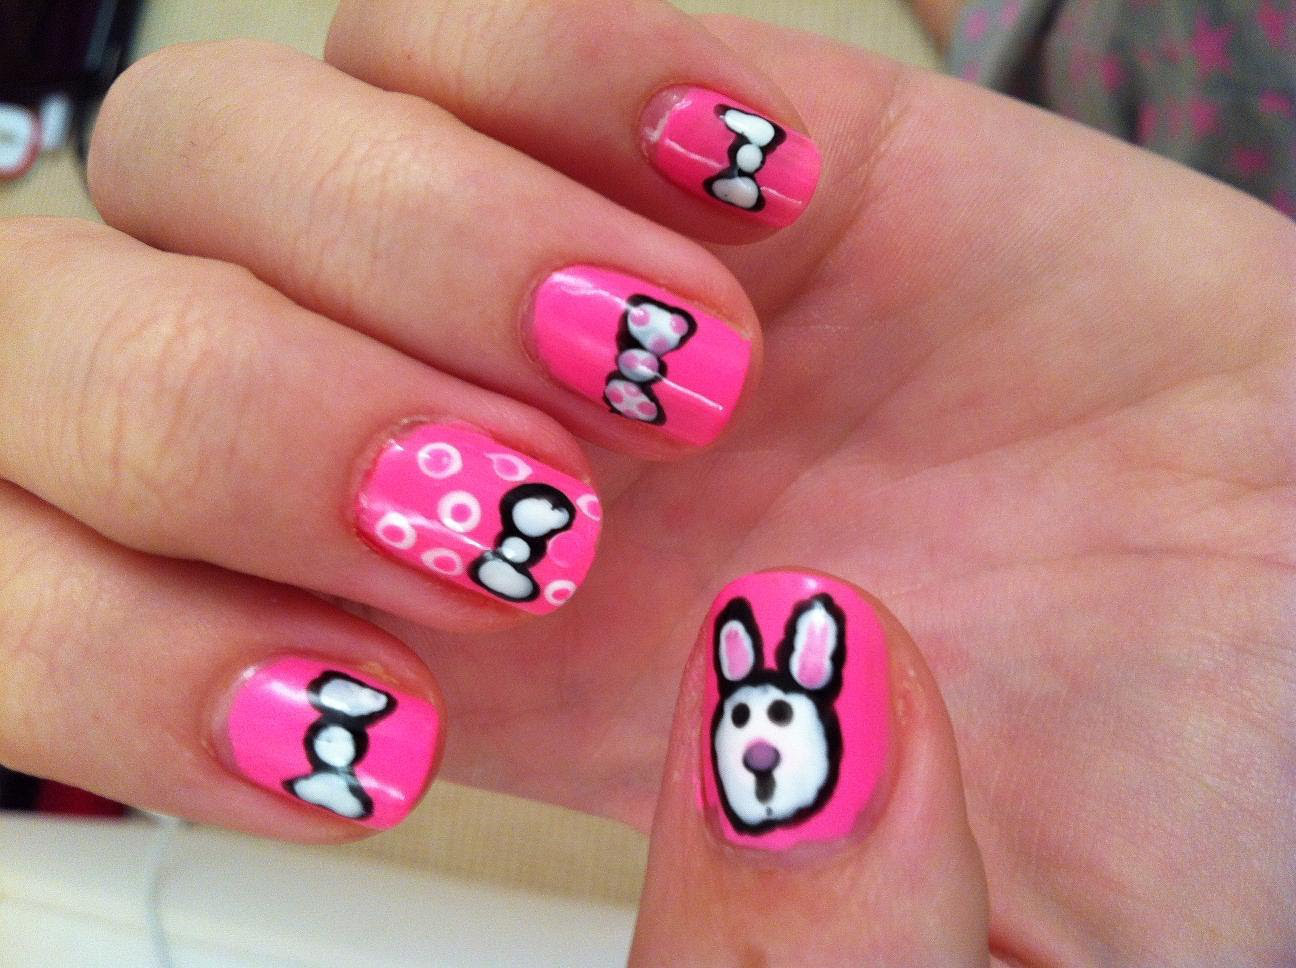 3. Cute Nail Colors for Teenagers - wide 4